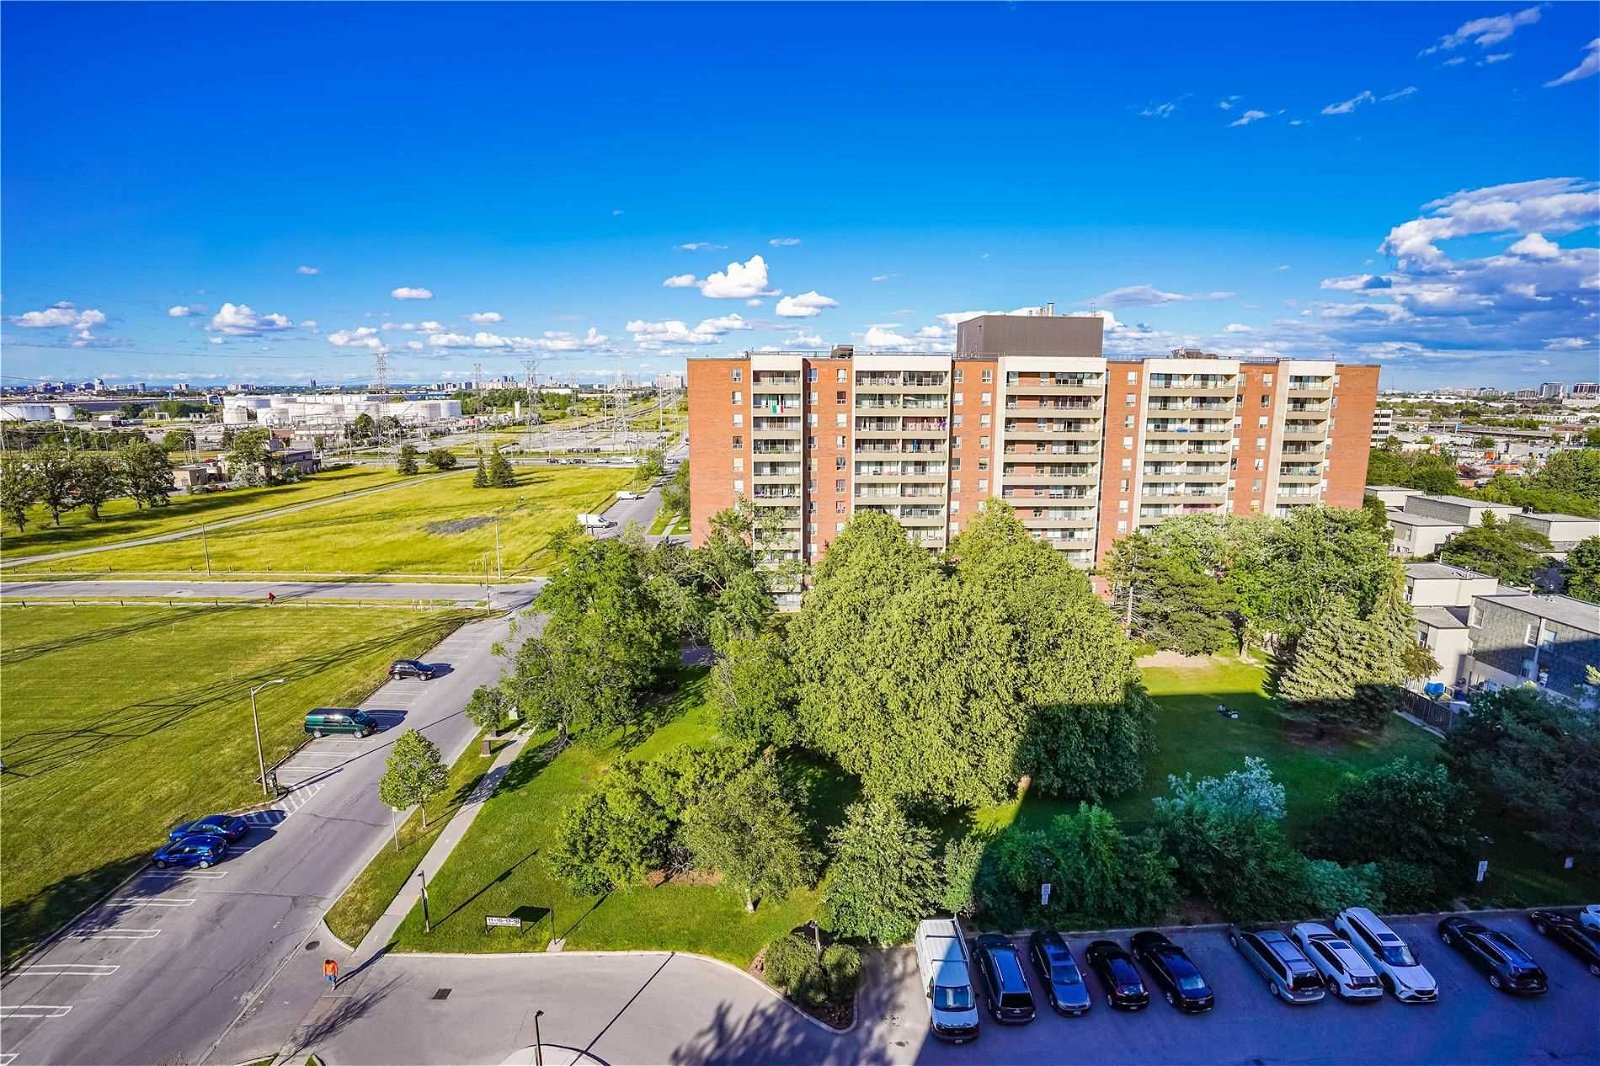 Four Winds Drive Condos located at 13 Four Winds Dr 0